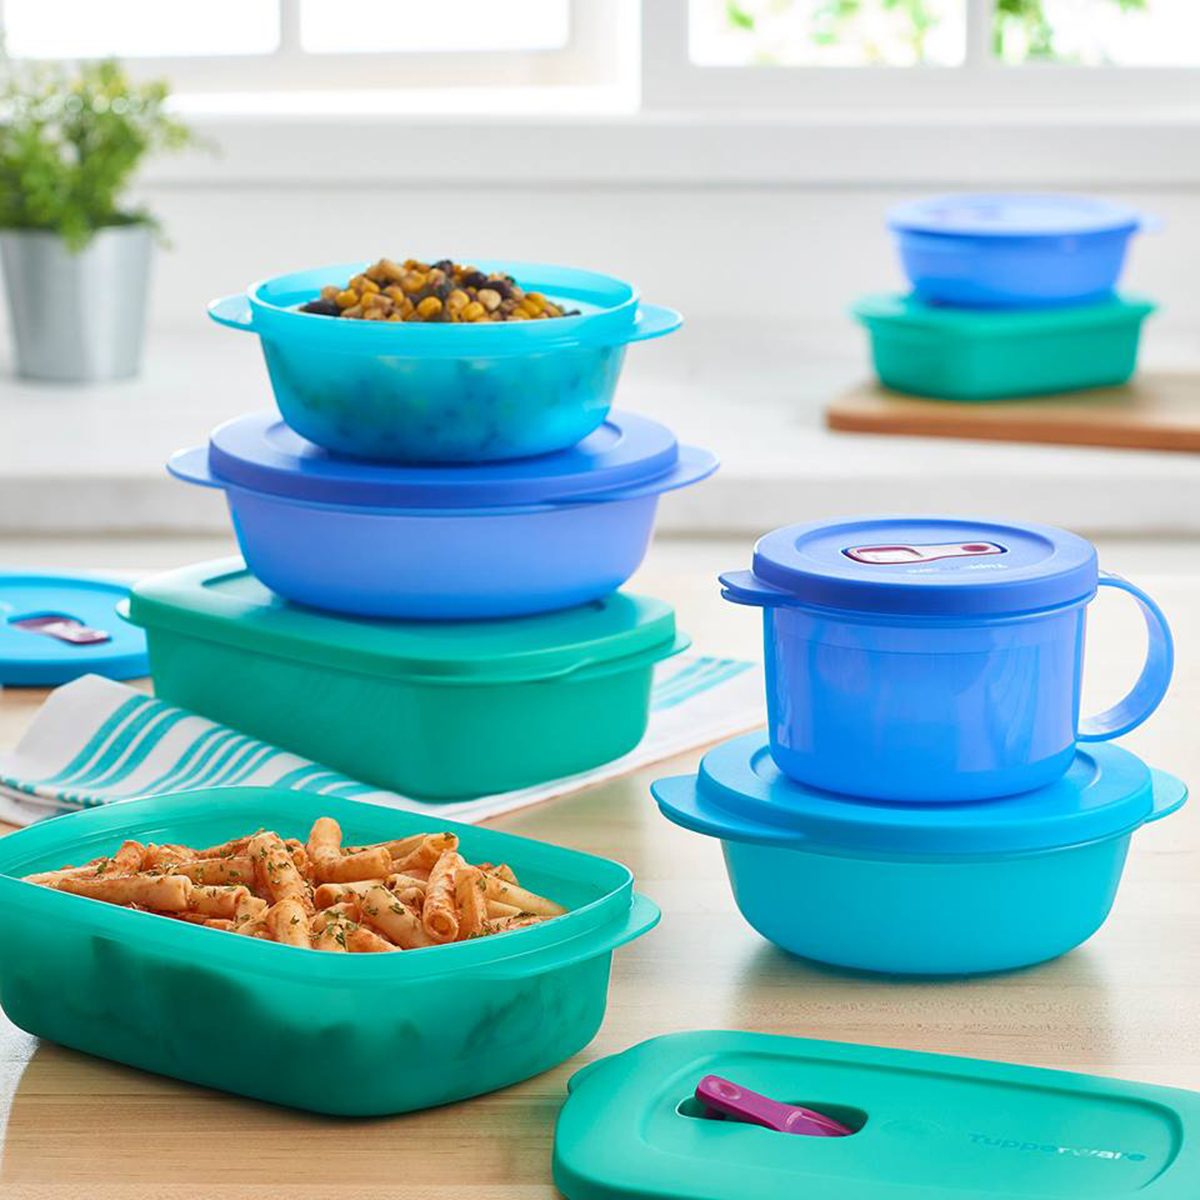 I Hosted A Tupperware Party Last Week Here S What I Learned